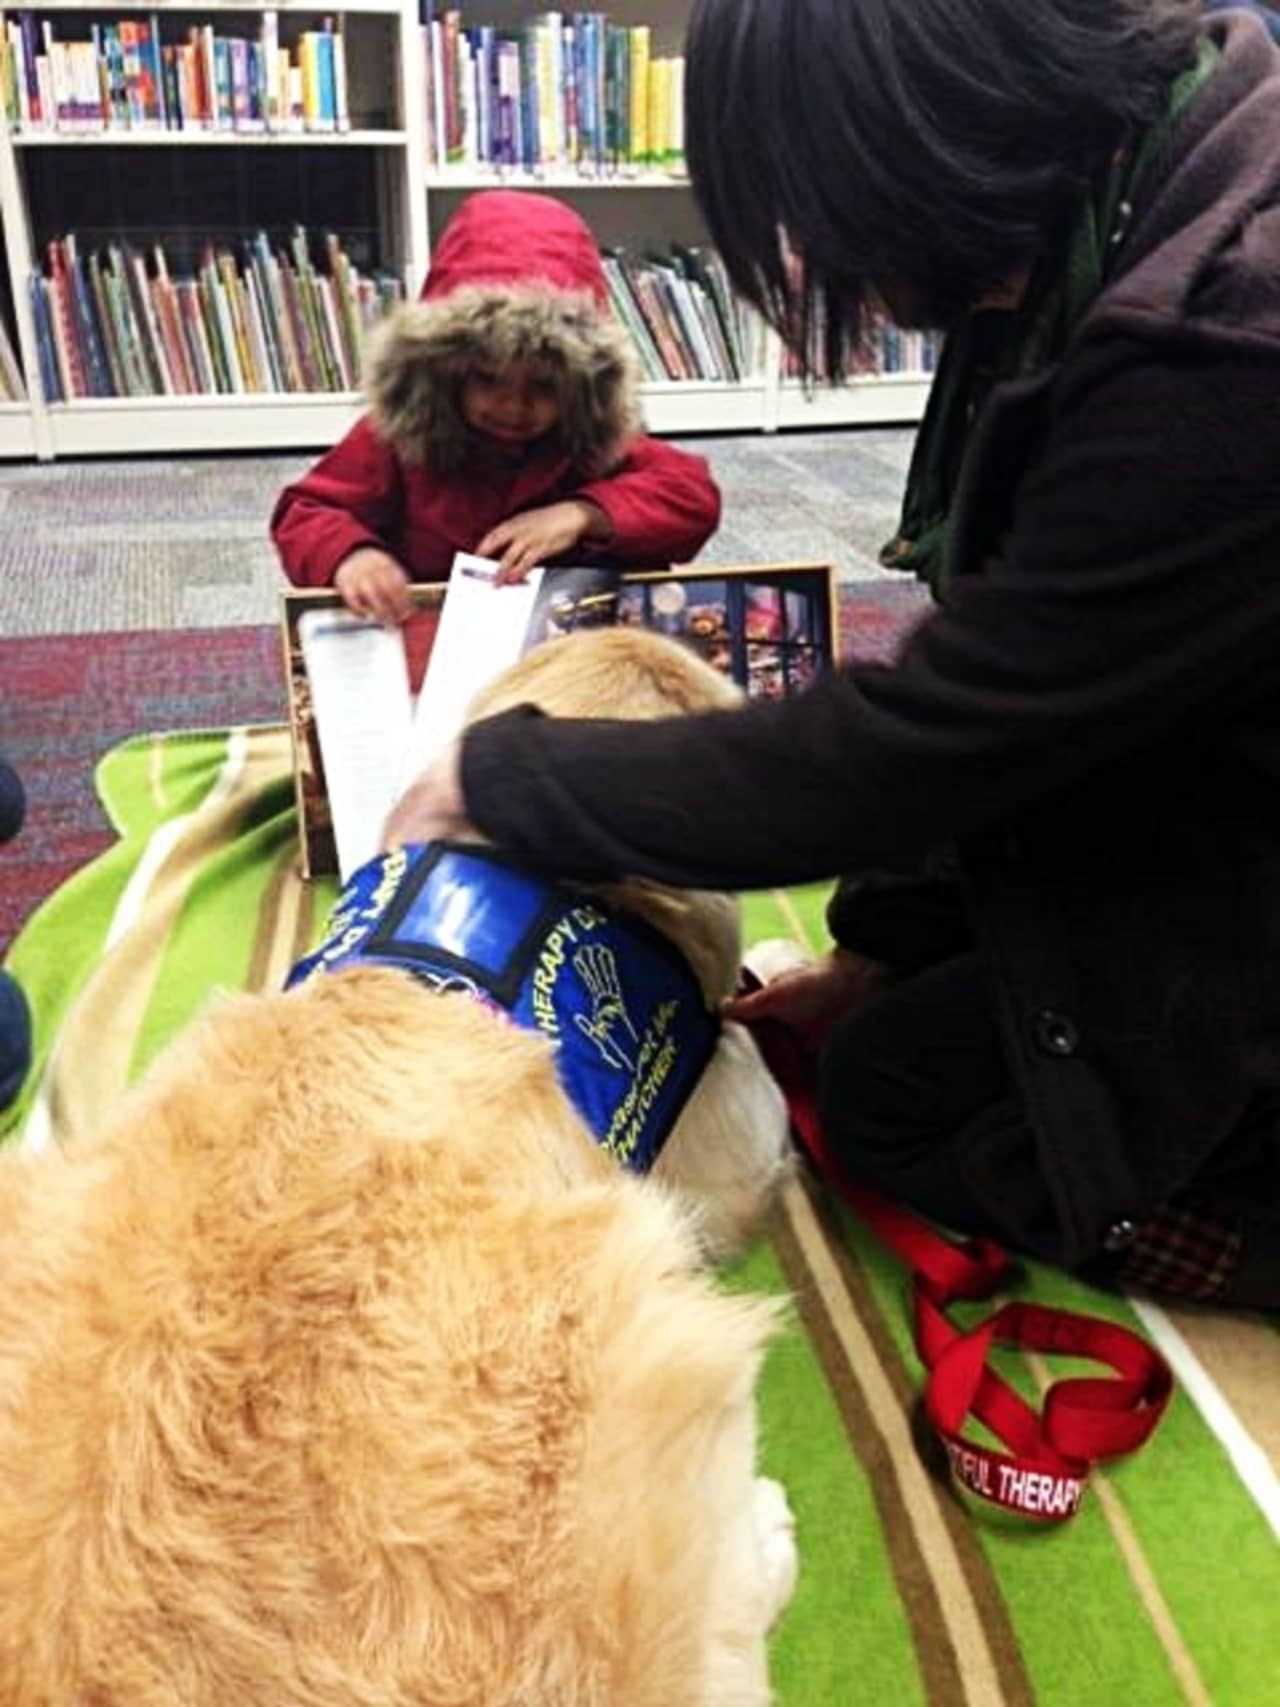 Folks can come read to or visit with Thatcher the Golden Retriever at the Bloomingdale Free Public Library.